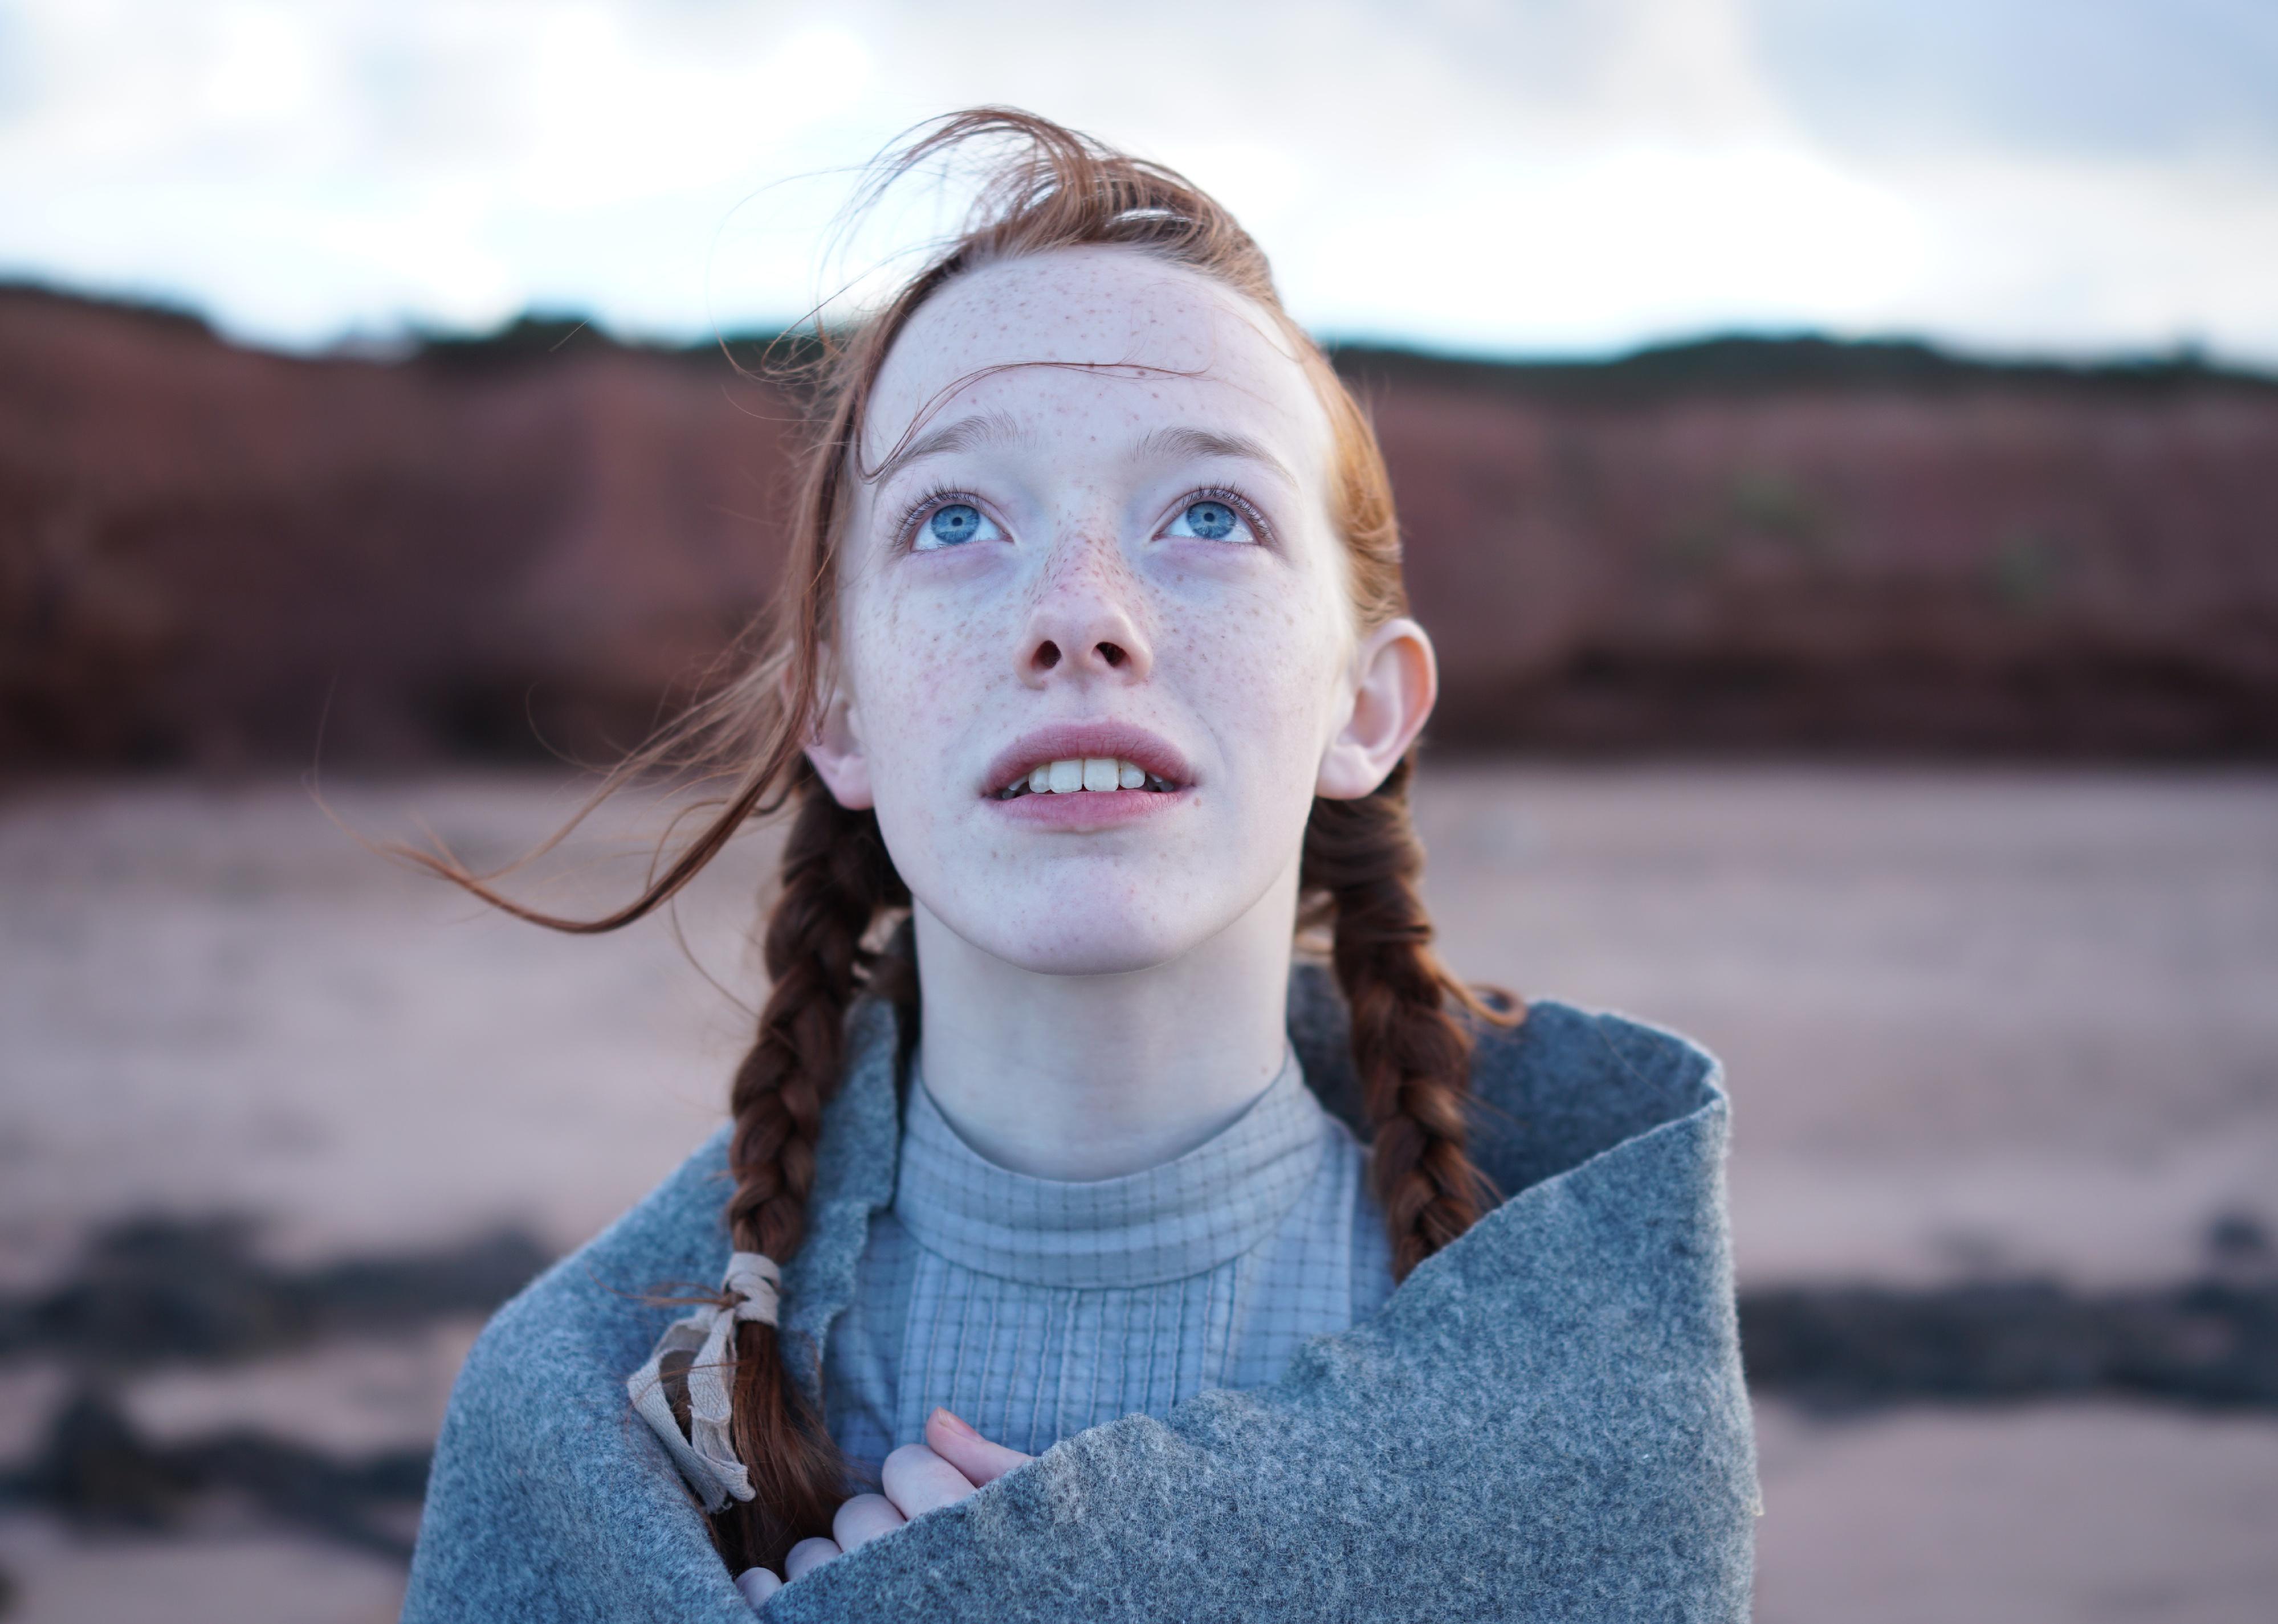 A girl, with red pigtail braids, wrapped in a blanket looking up at the sky.